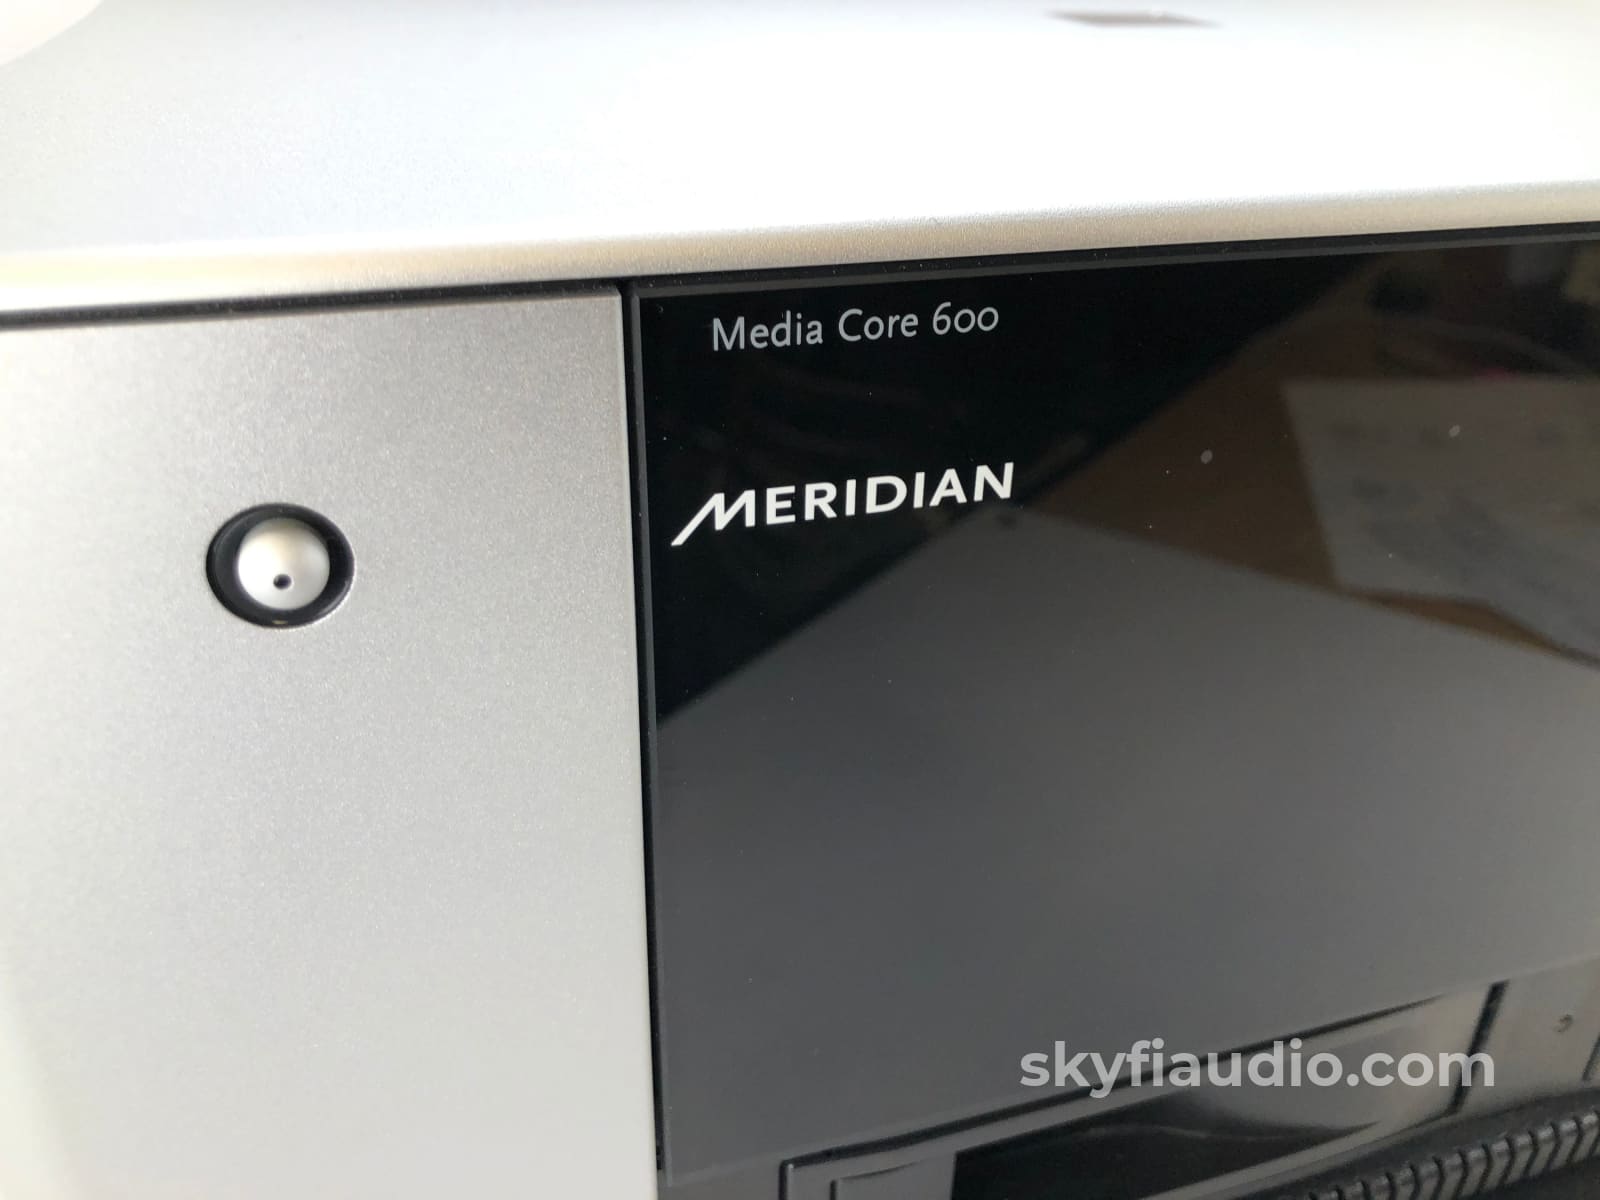 Meridian Media Core 600 - Six Zone Sooloos Digital System Thats Loaded With Music